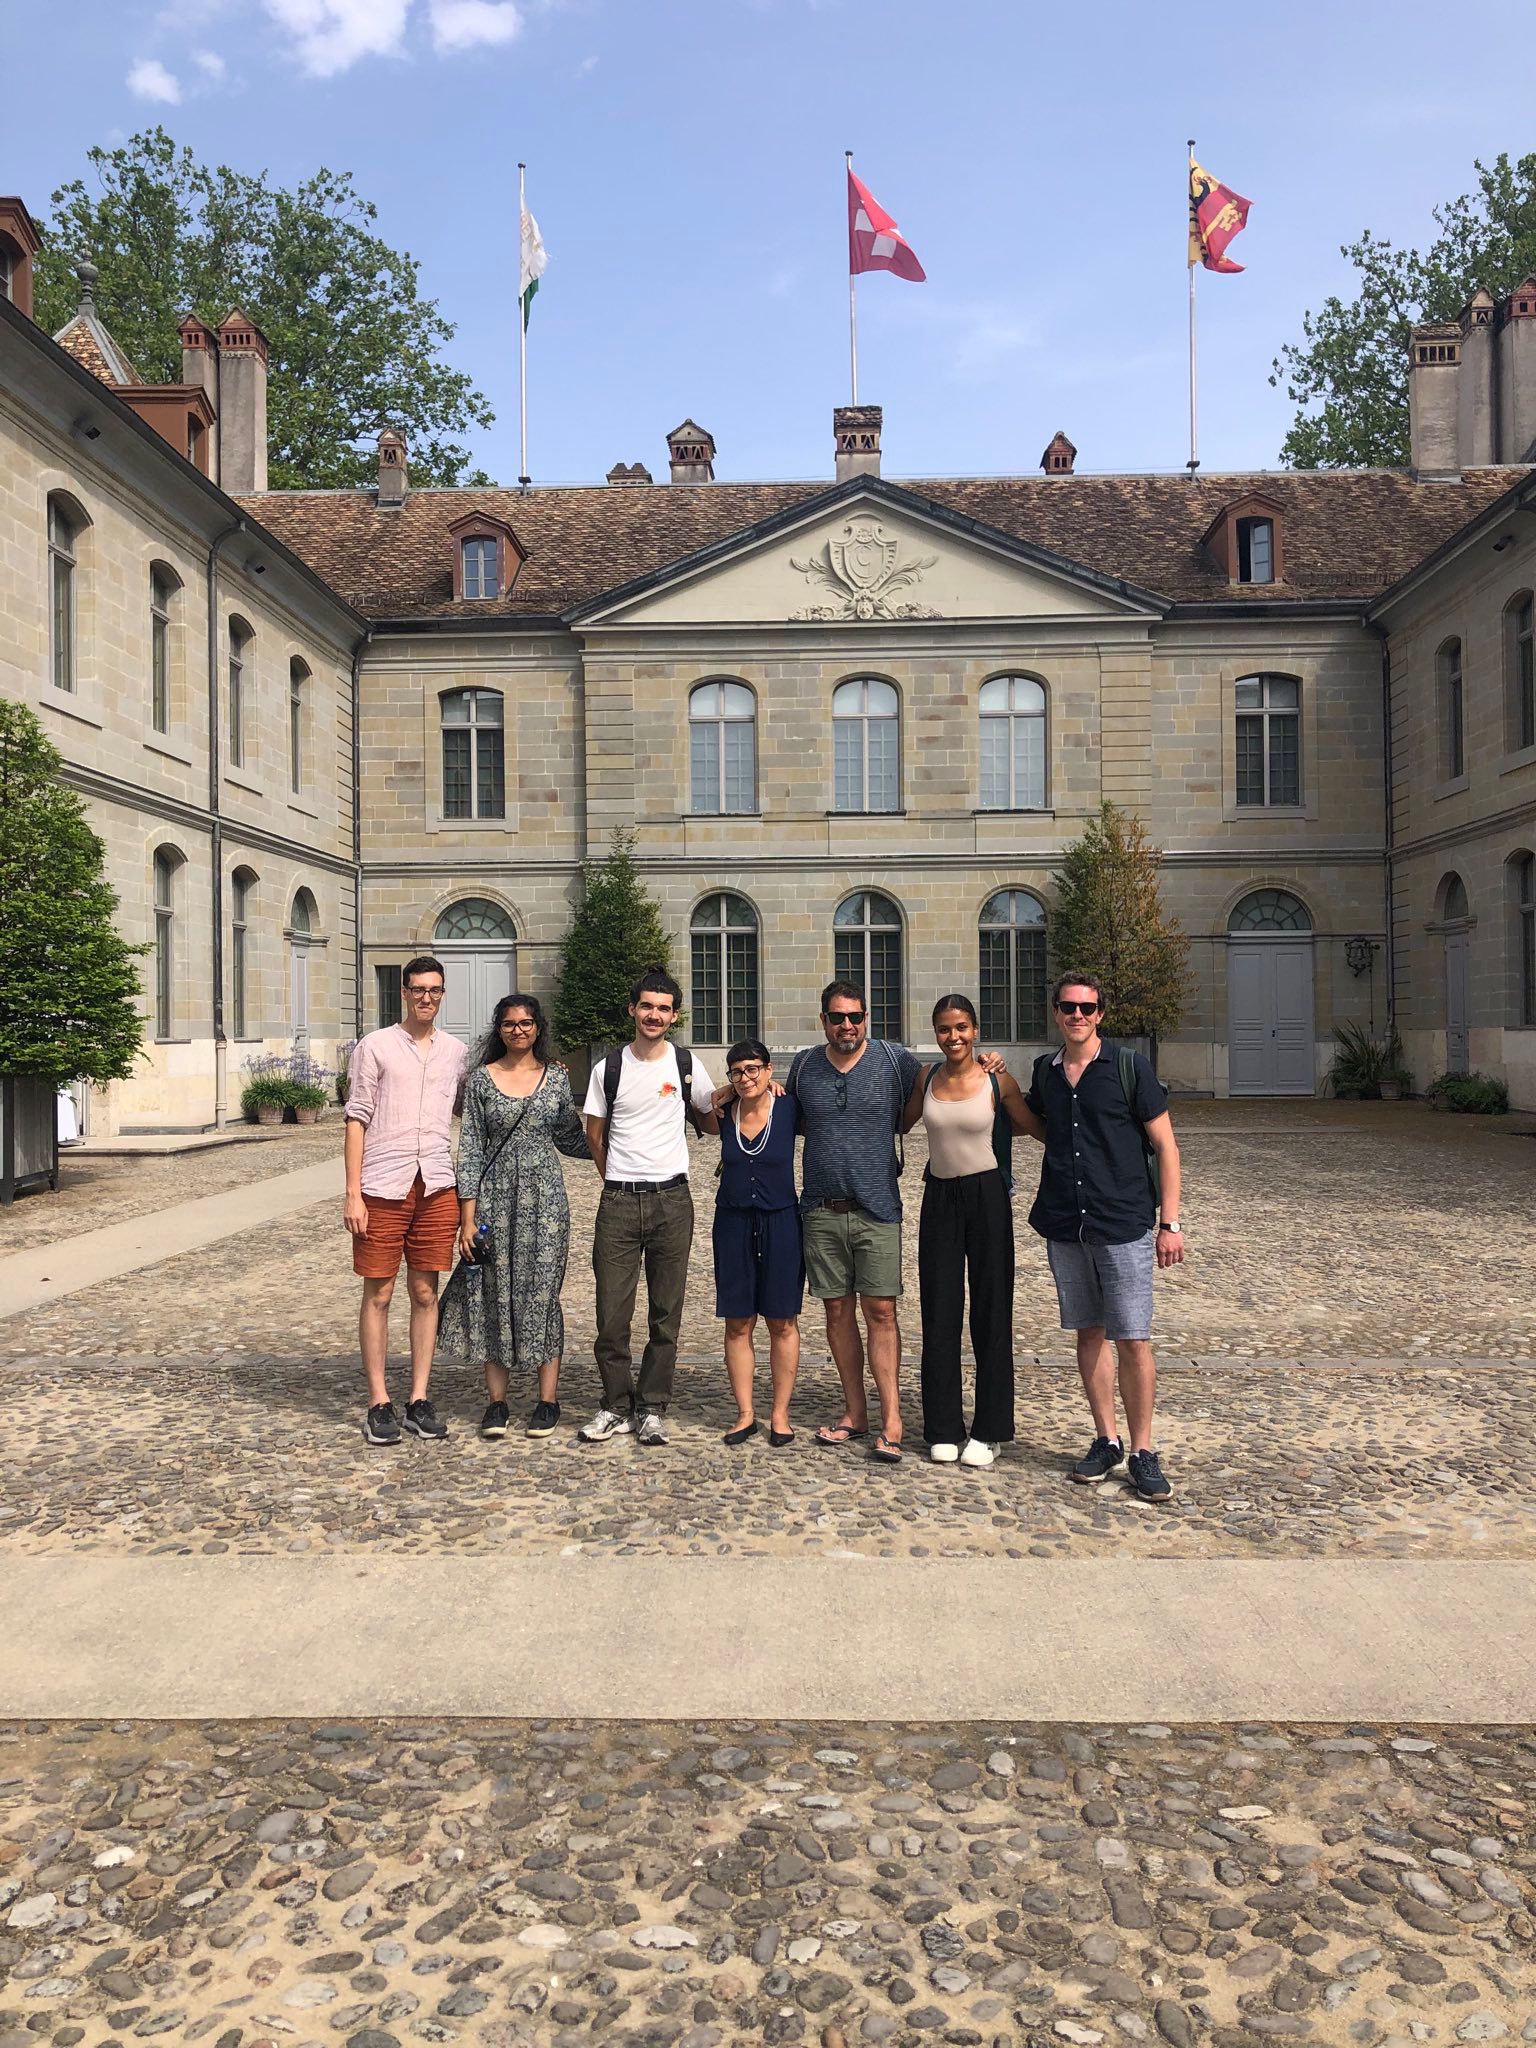 Seven people, including Penn undergrad Sophie Mwaisela, stand in front of the National Museum in Prangins, Switzerland.